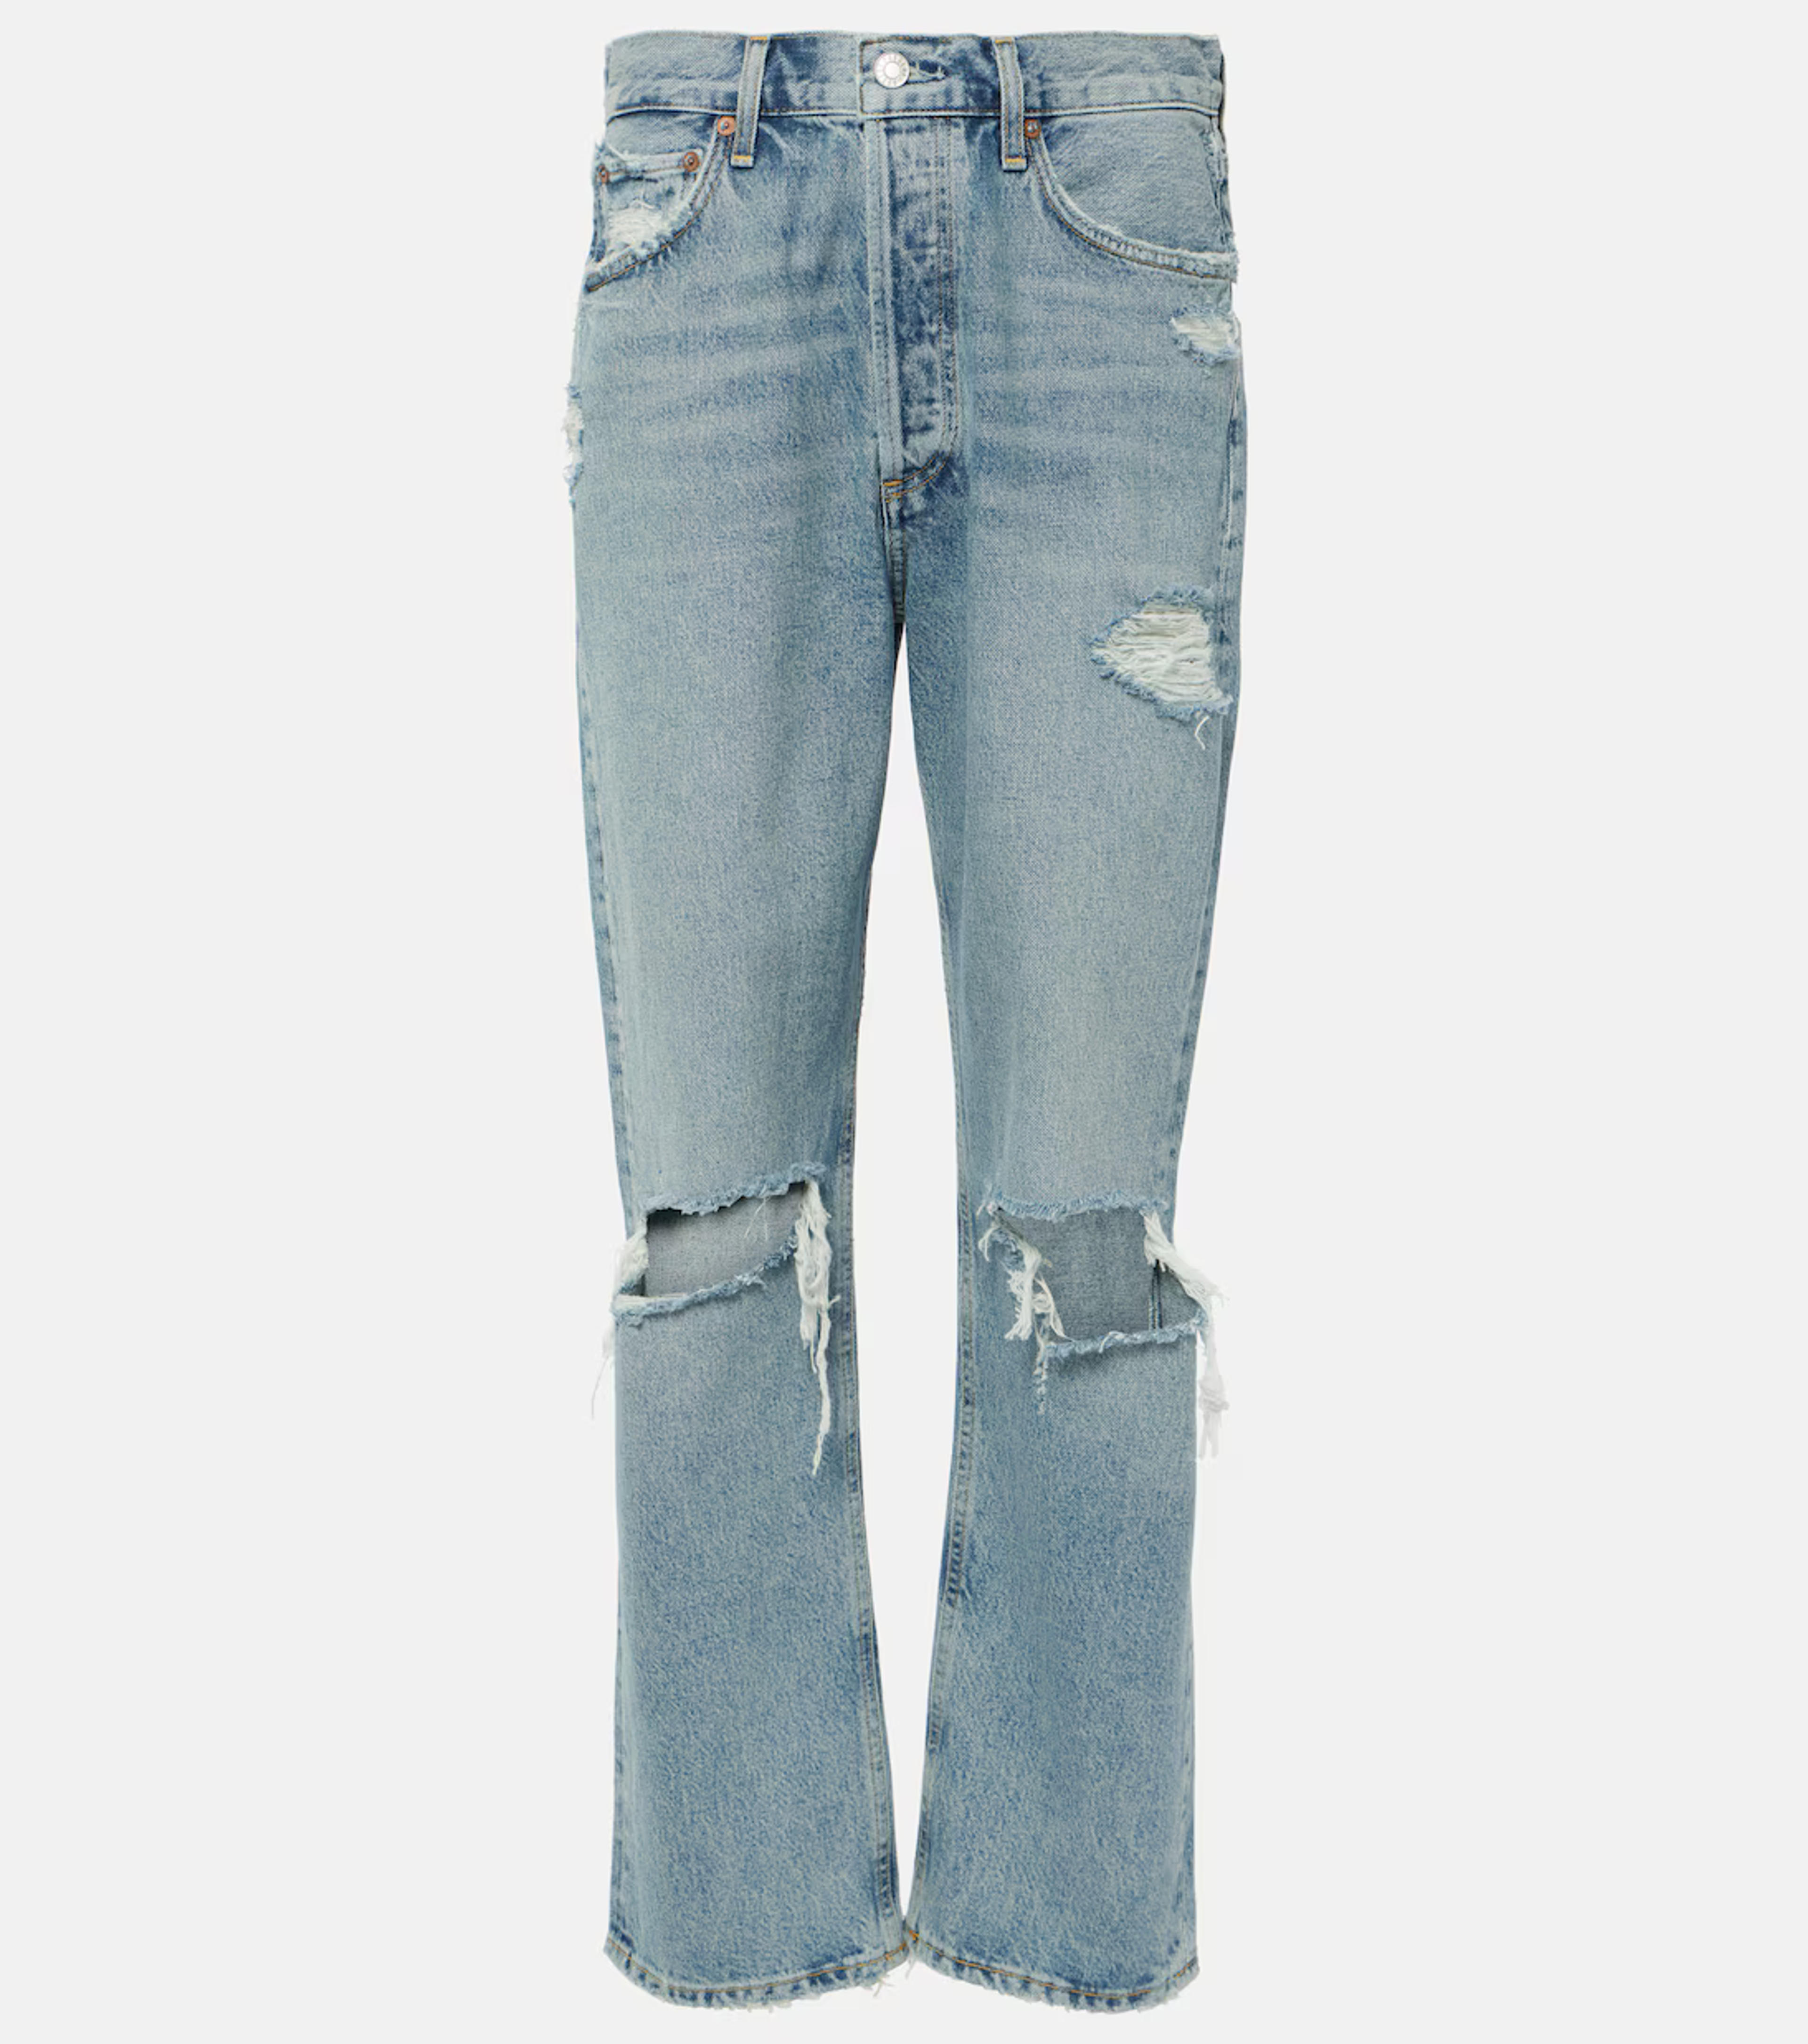 90s distressed mid-rise straight jeans in blue - Agolde | Mytheresa